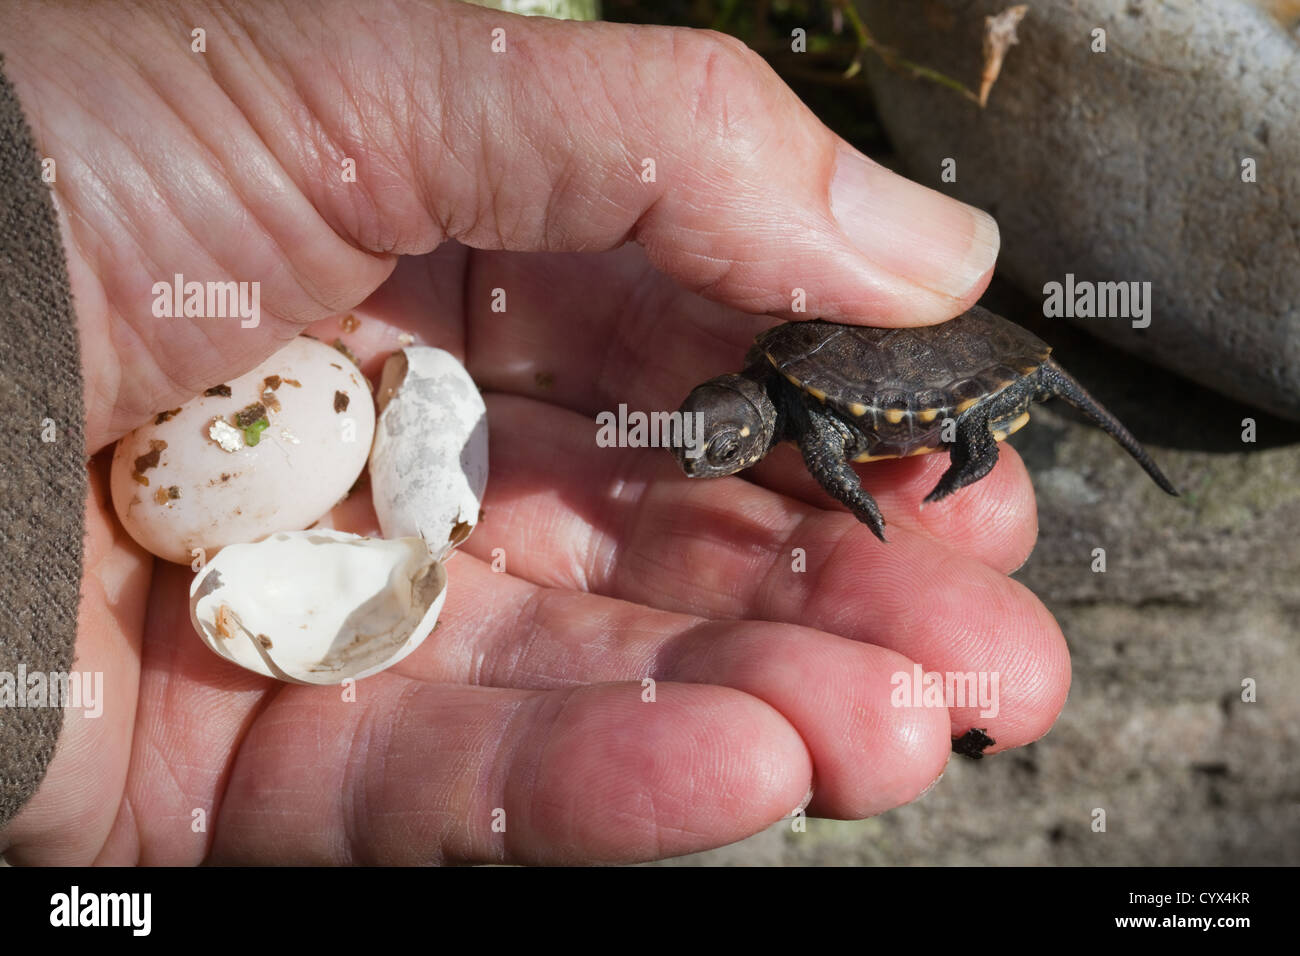 European Pond Turtle Emys orbicularis.Hatchling held in the hand with an unhatched egg and shell remnants from this hatching. Bred in captivity. Stock Photo